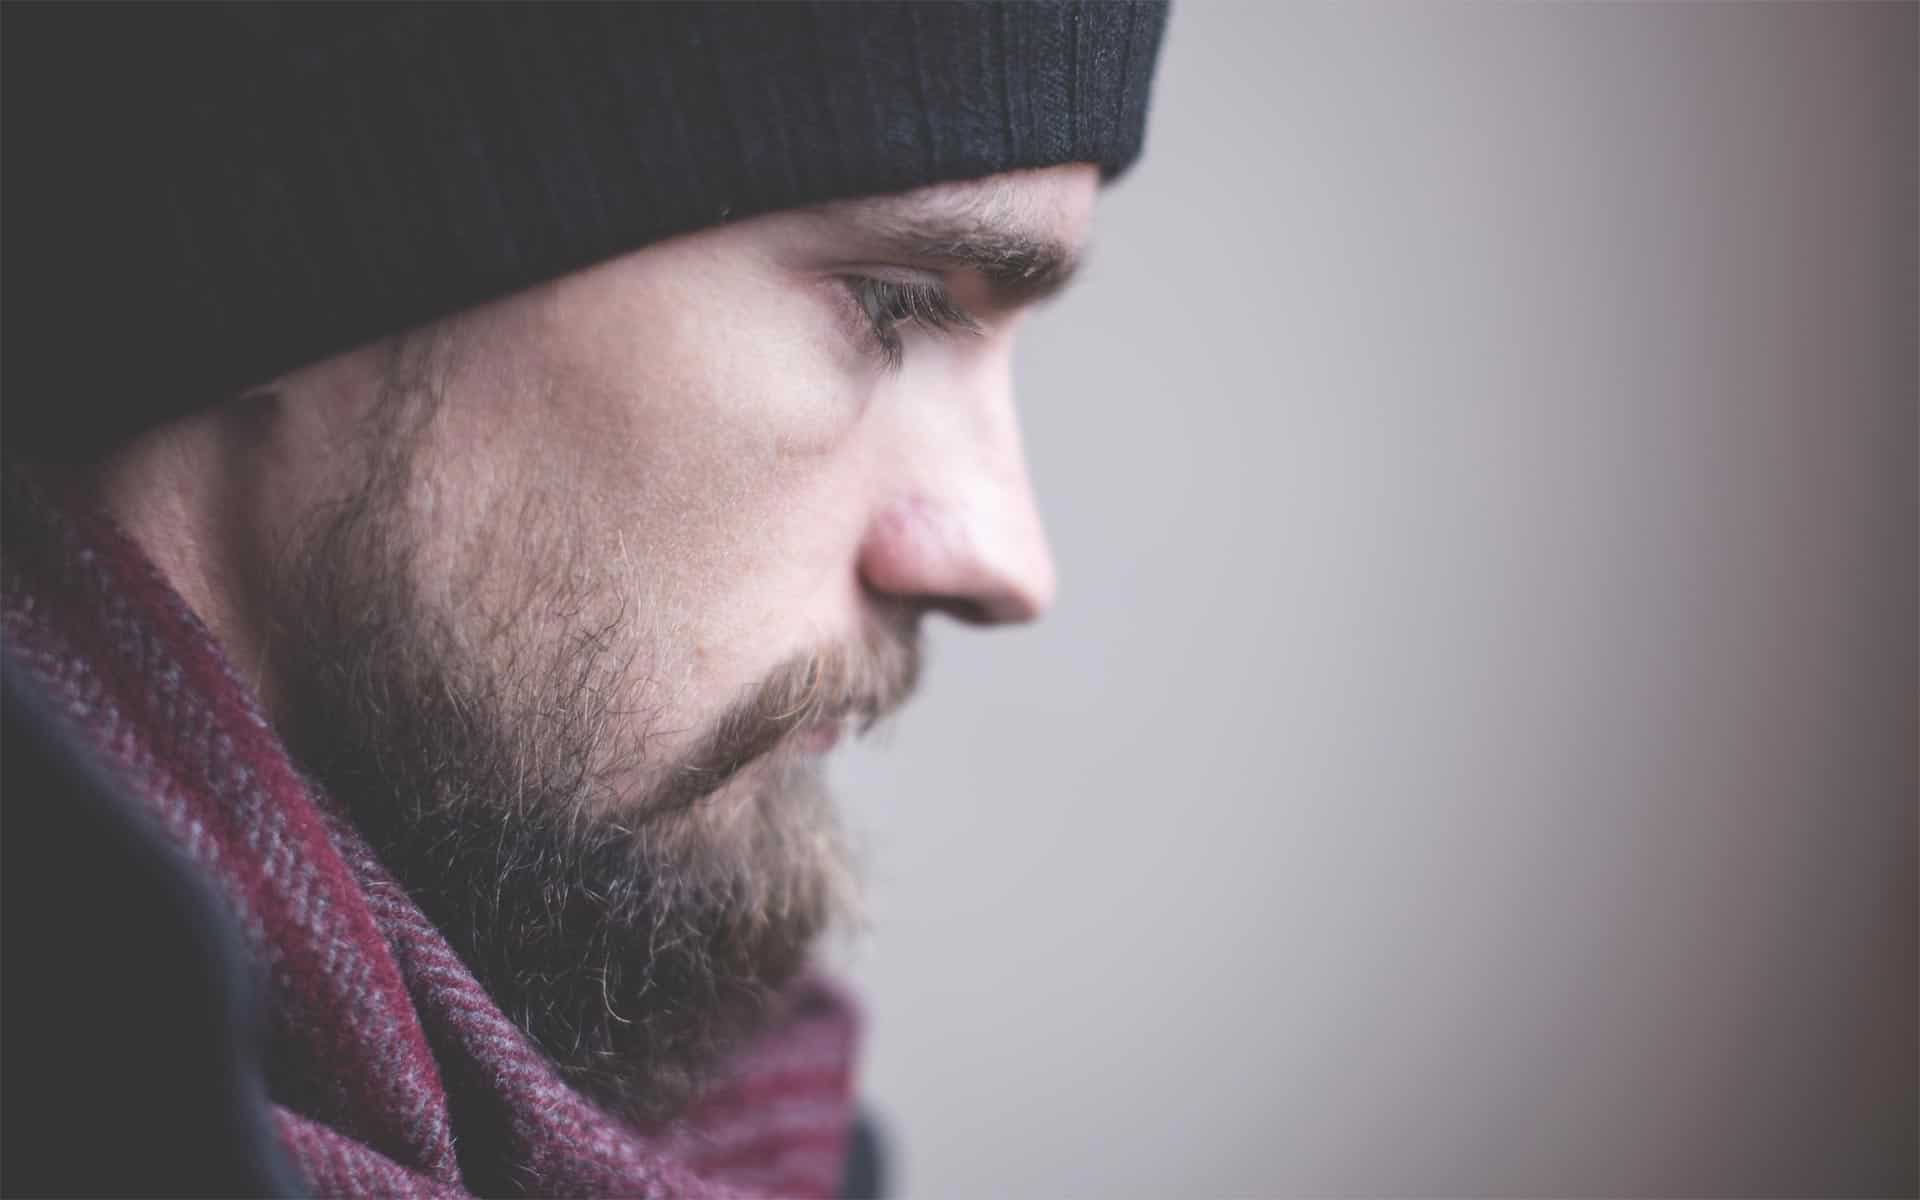 profile photo of a man's face dressed in warm clothing and looking concerned